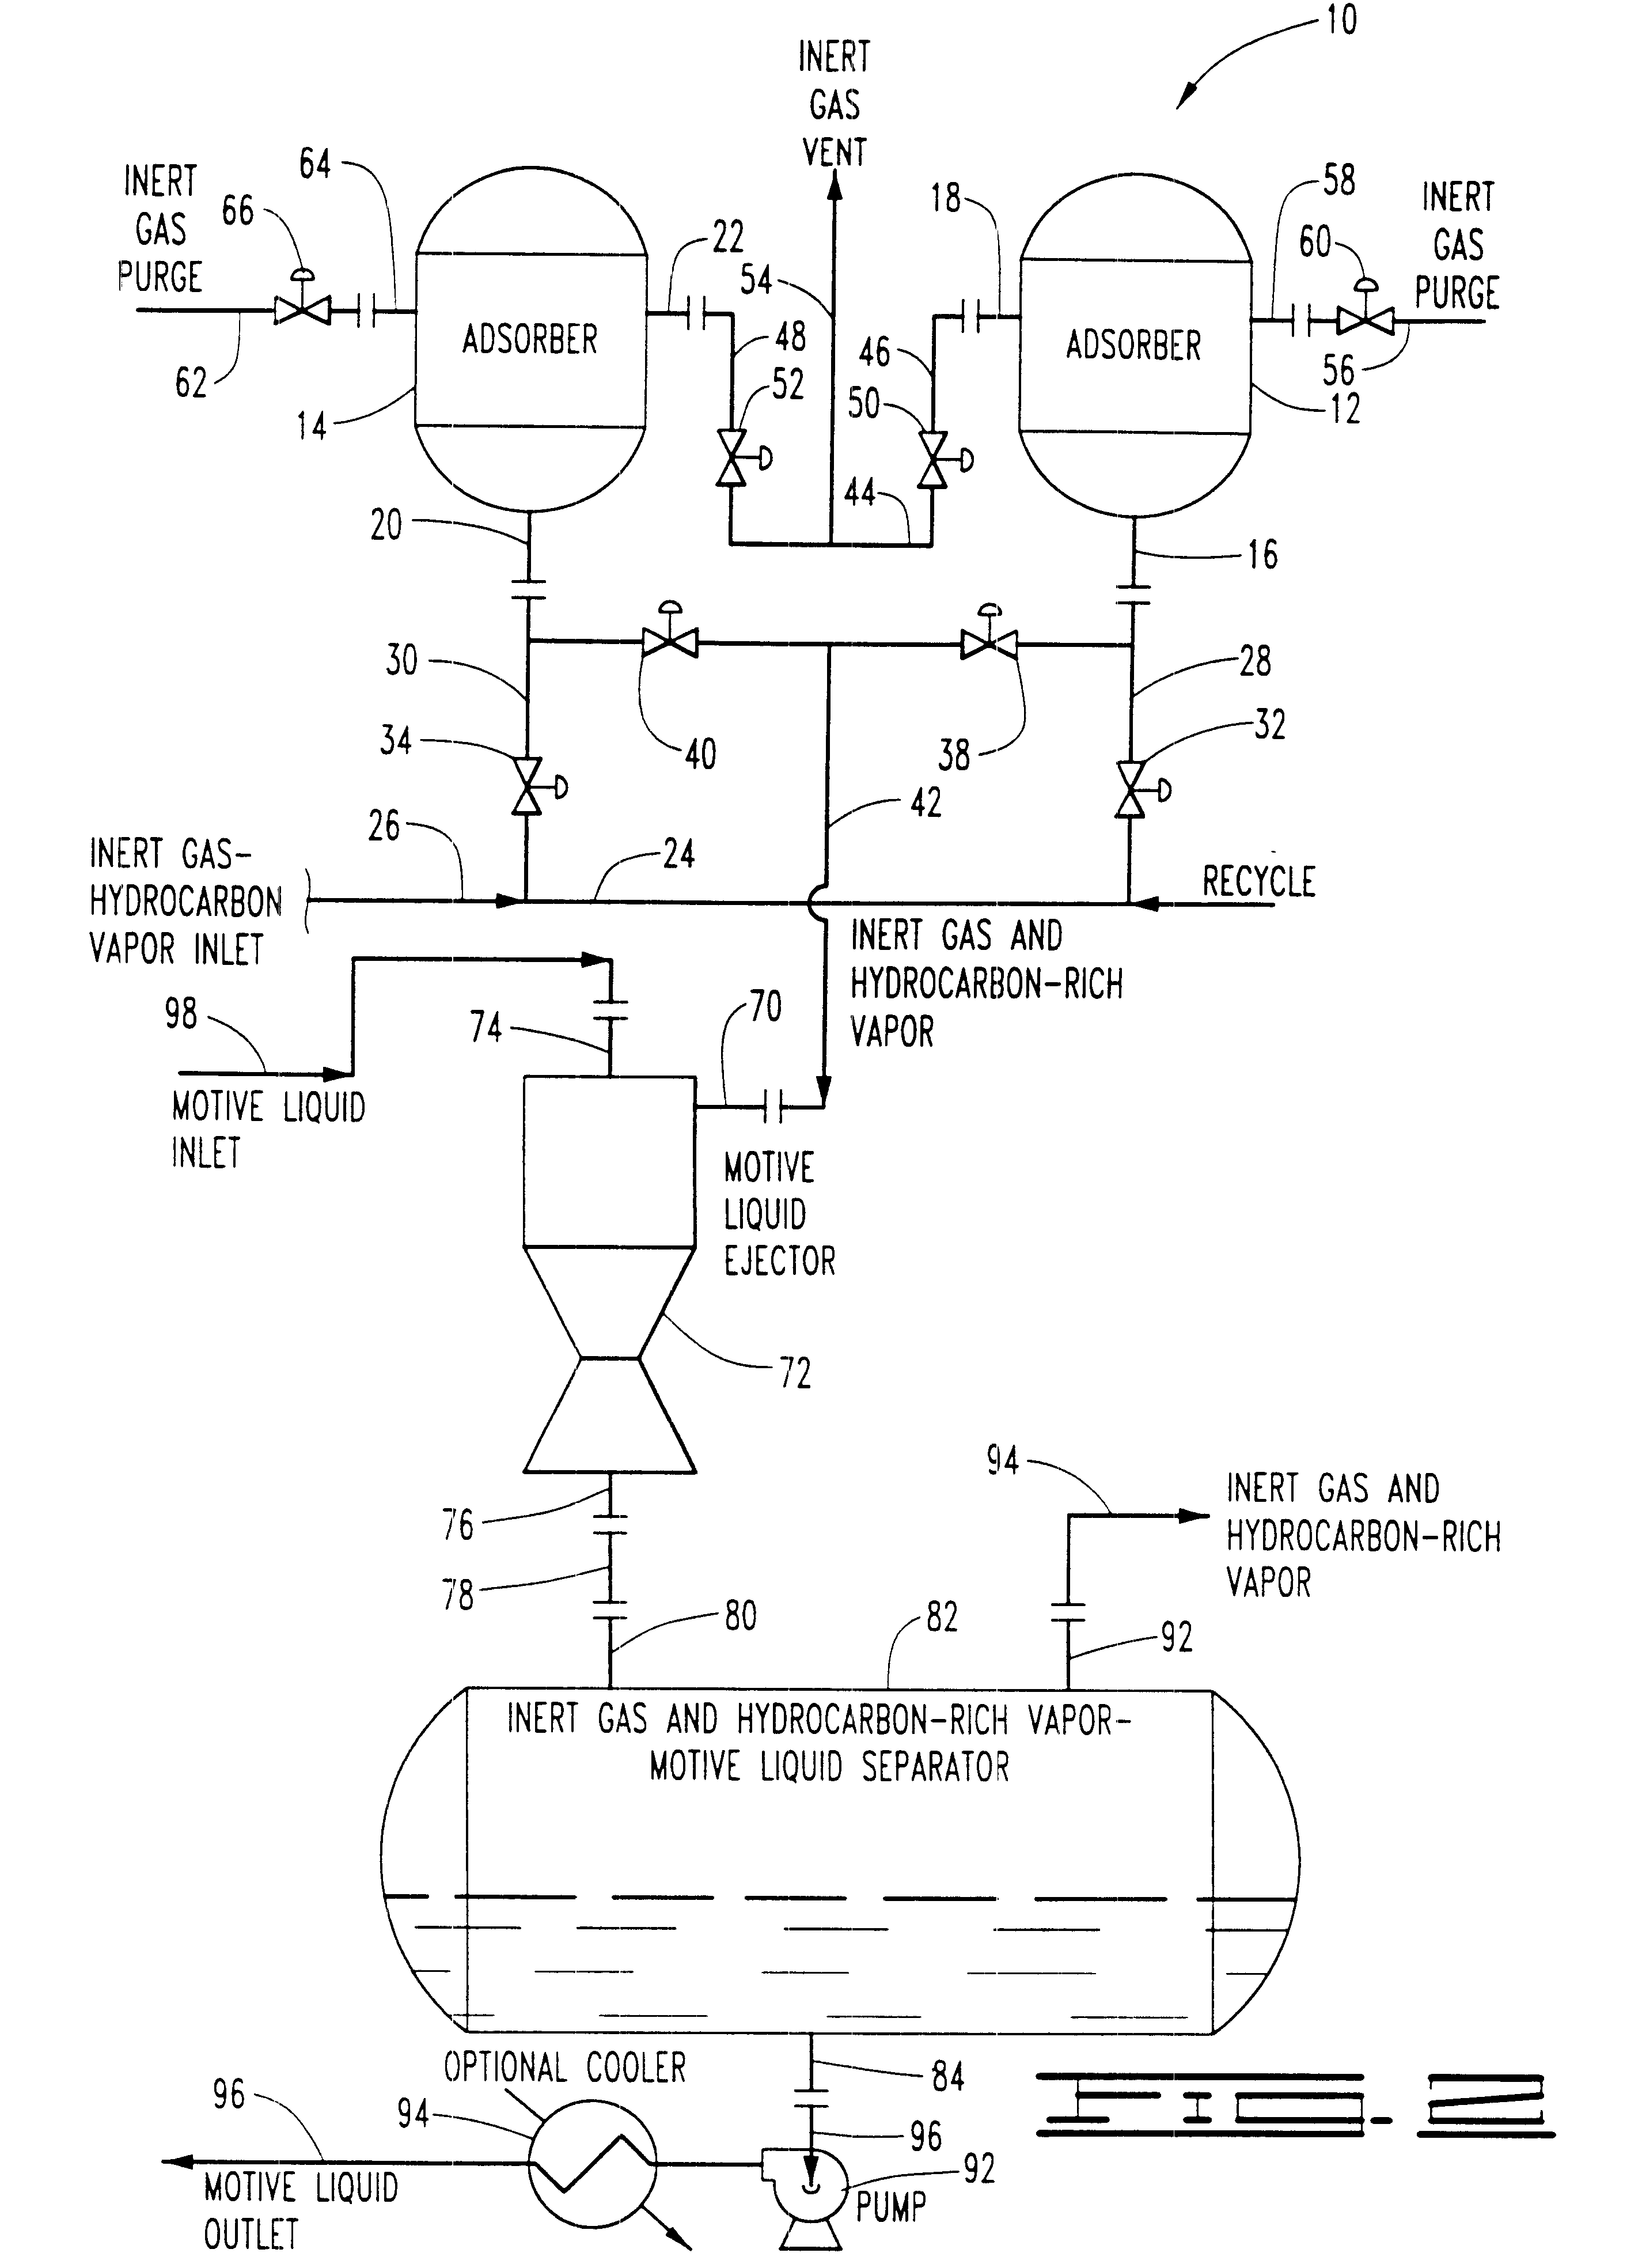 Process for recovering hydrocarbons from inert gas-hydrocarbon vapor mixtures